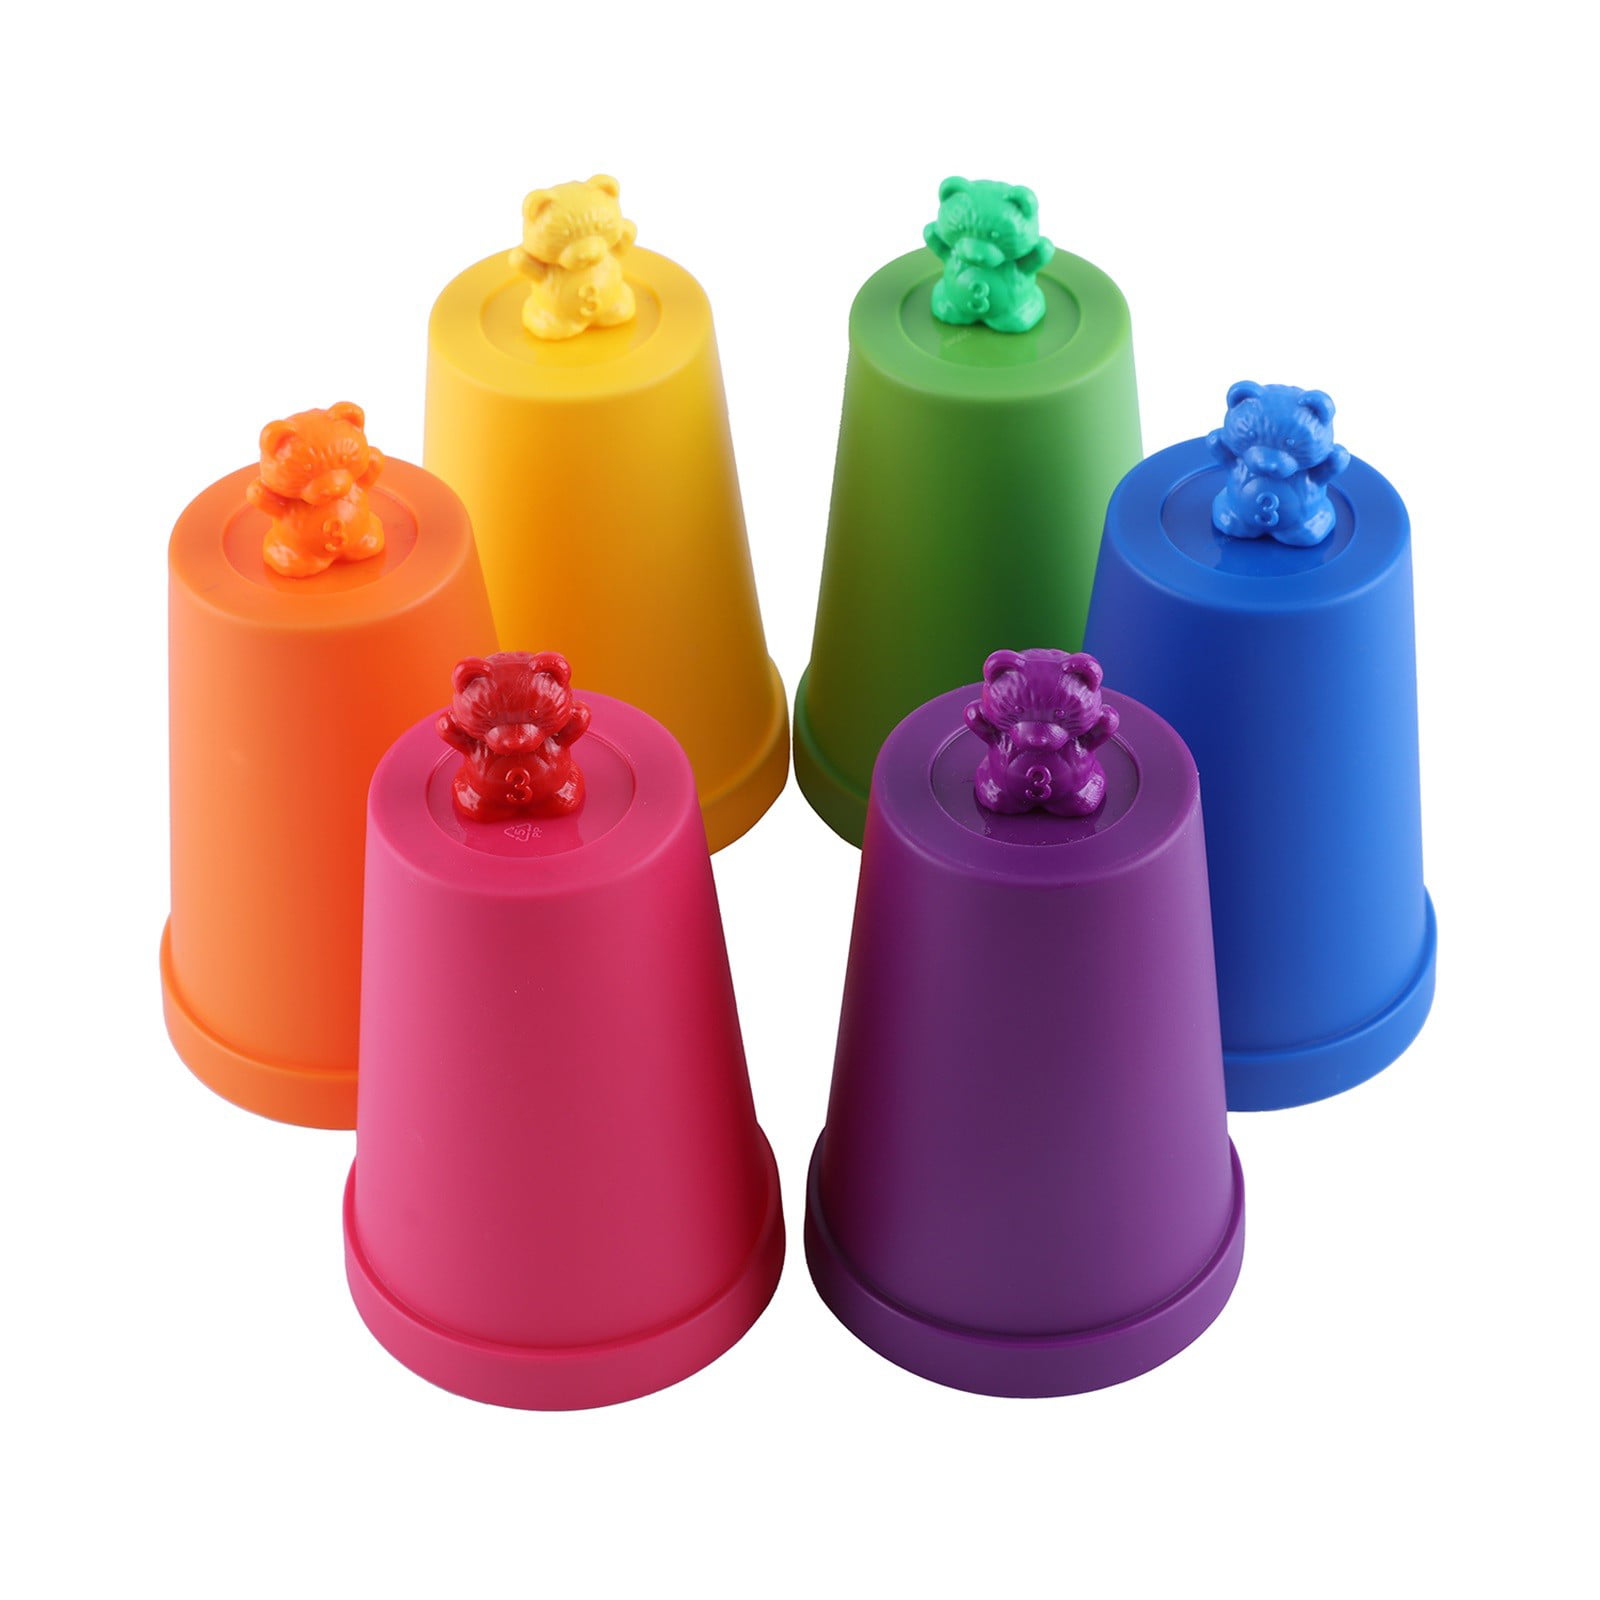 71pcs Rainbow Counting Bears Set With Matching Sorting Cups Dices and Tweezer for sale online 